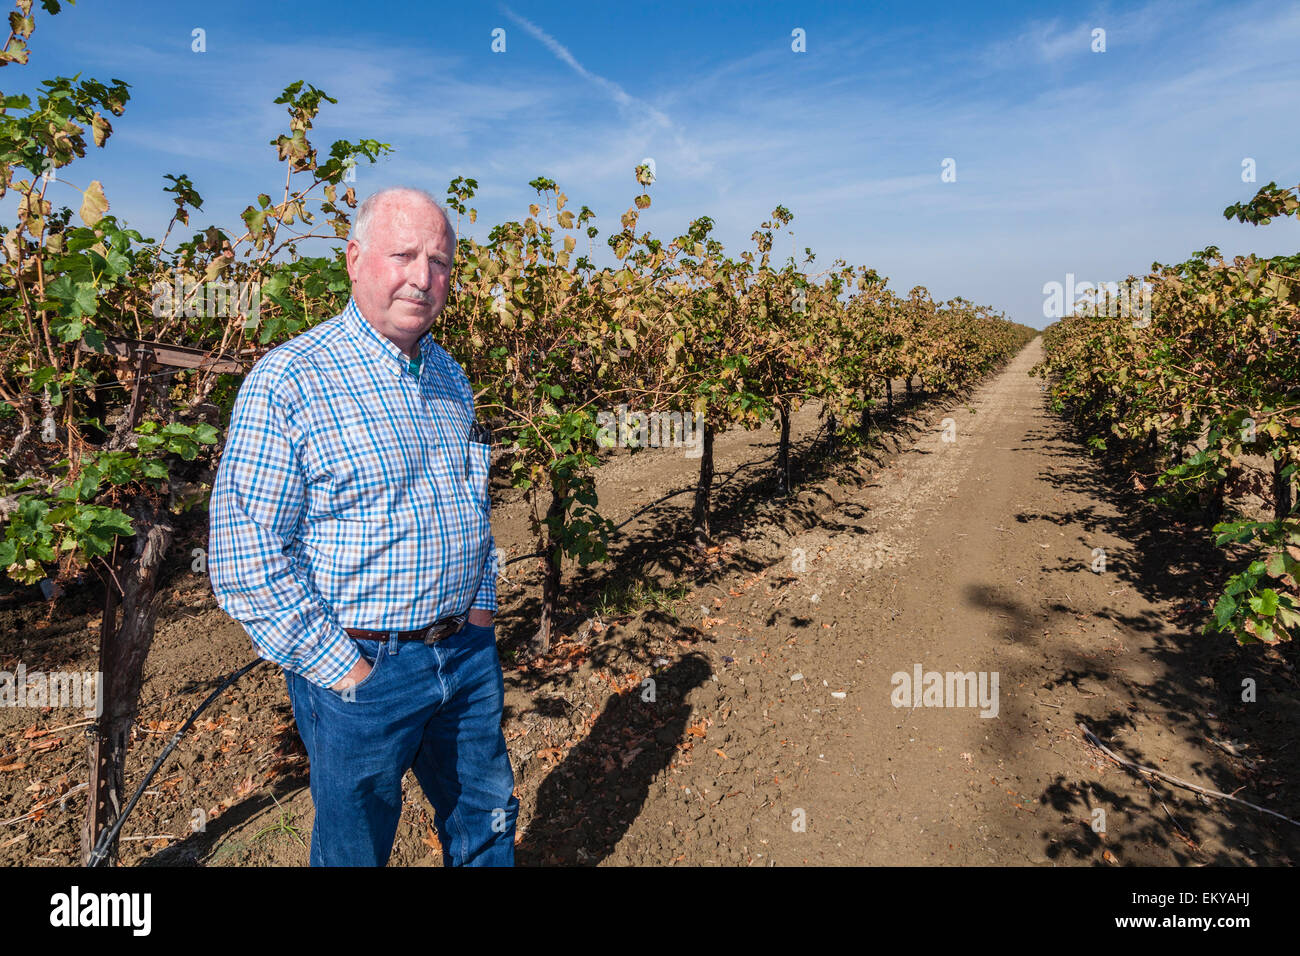 Rod Cardella standing in his vinyard which uses drip irrigation. Rod Cardella runs Cardella Winery, a family business since 1969 Stock Photo